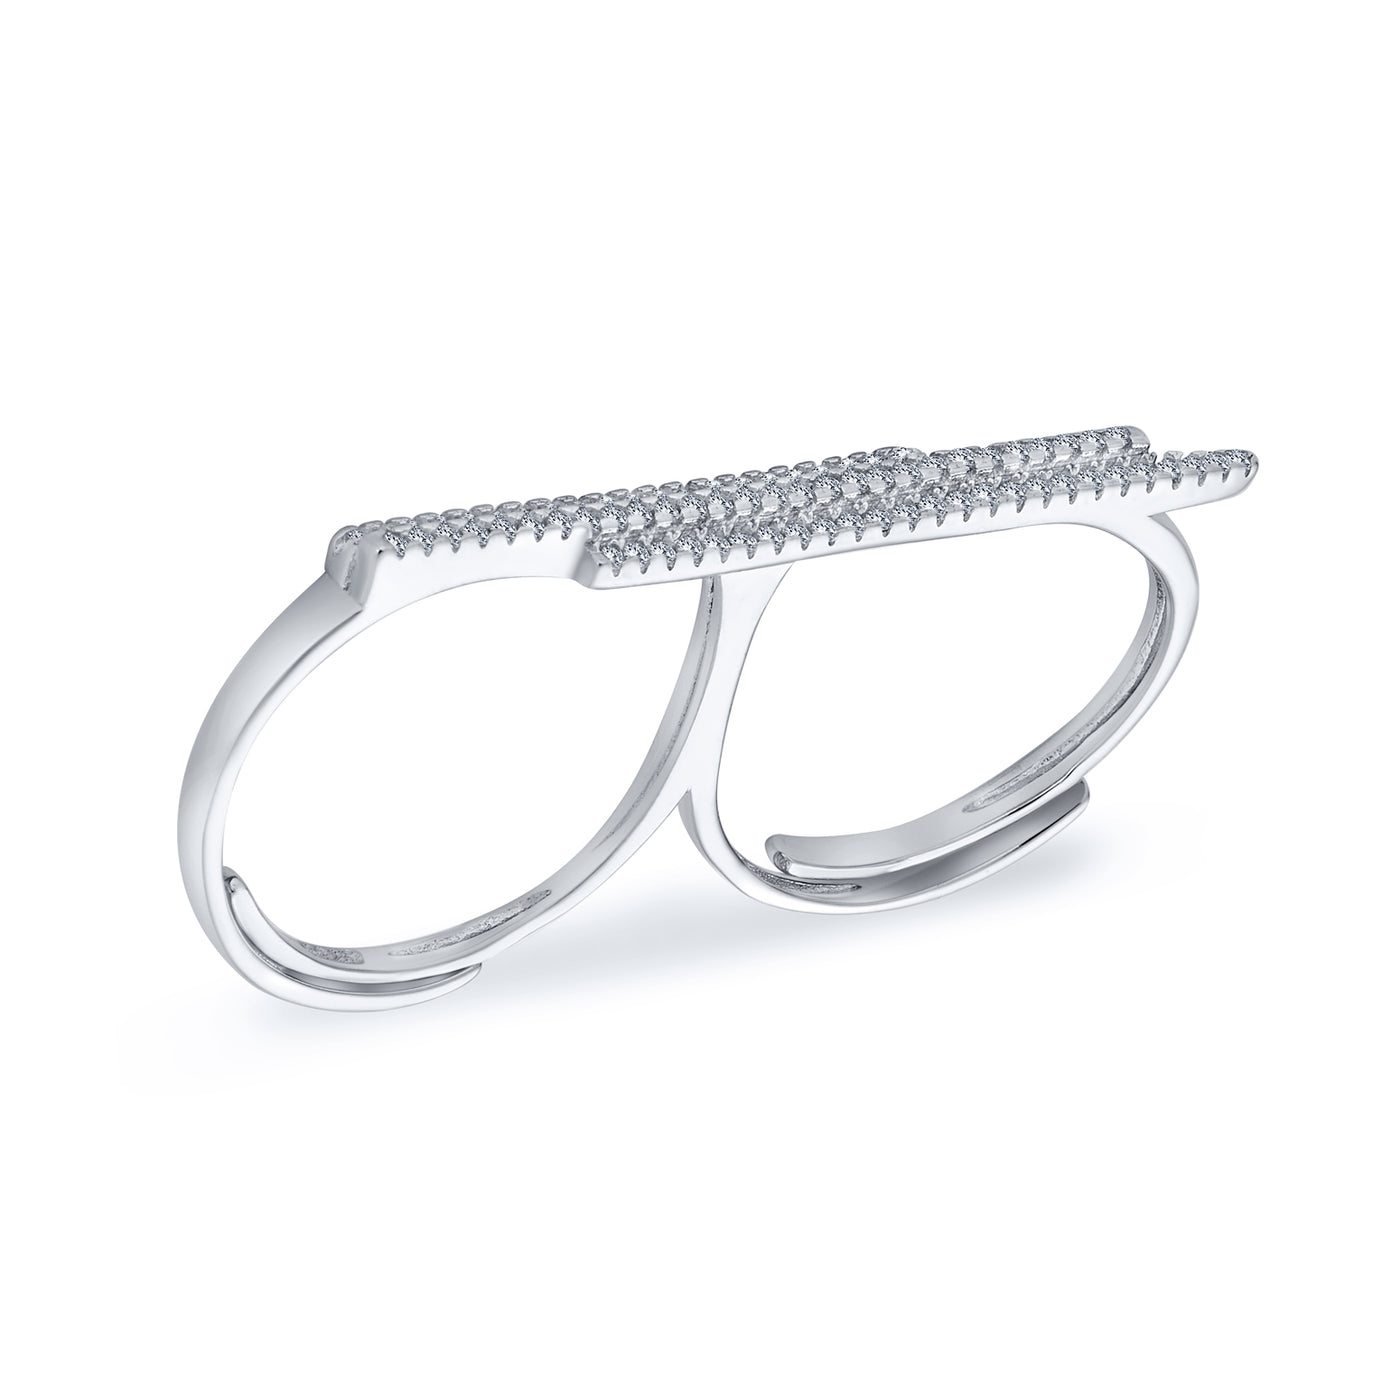 Boho CZ Pave Double Sideway Bar Two Finger Ring .925 Sterling Silver